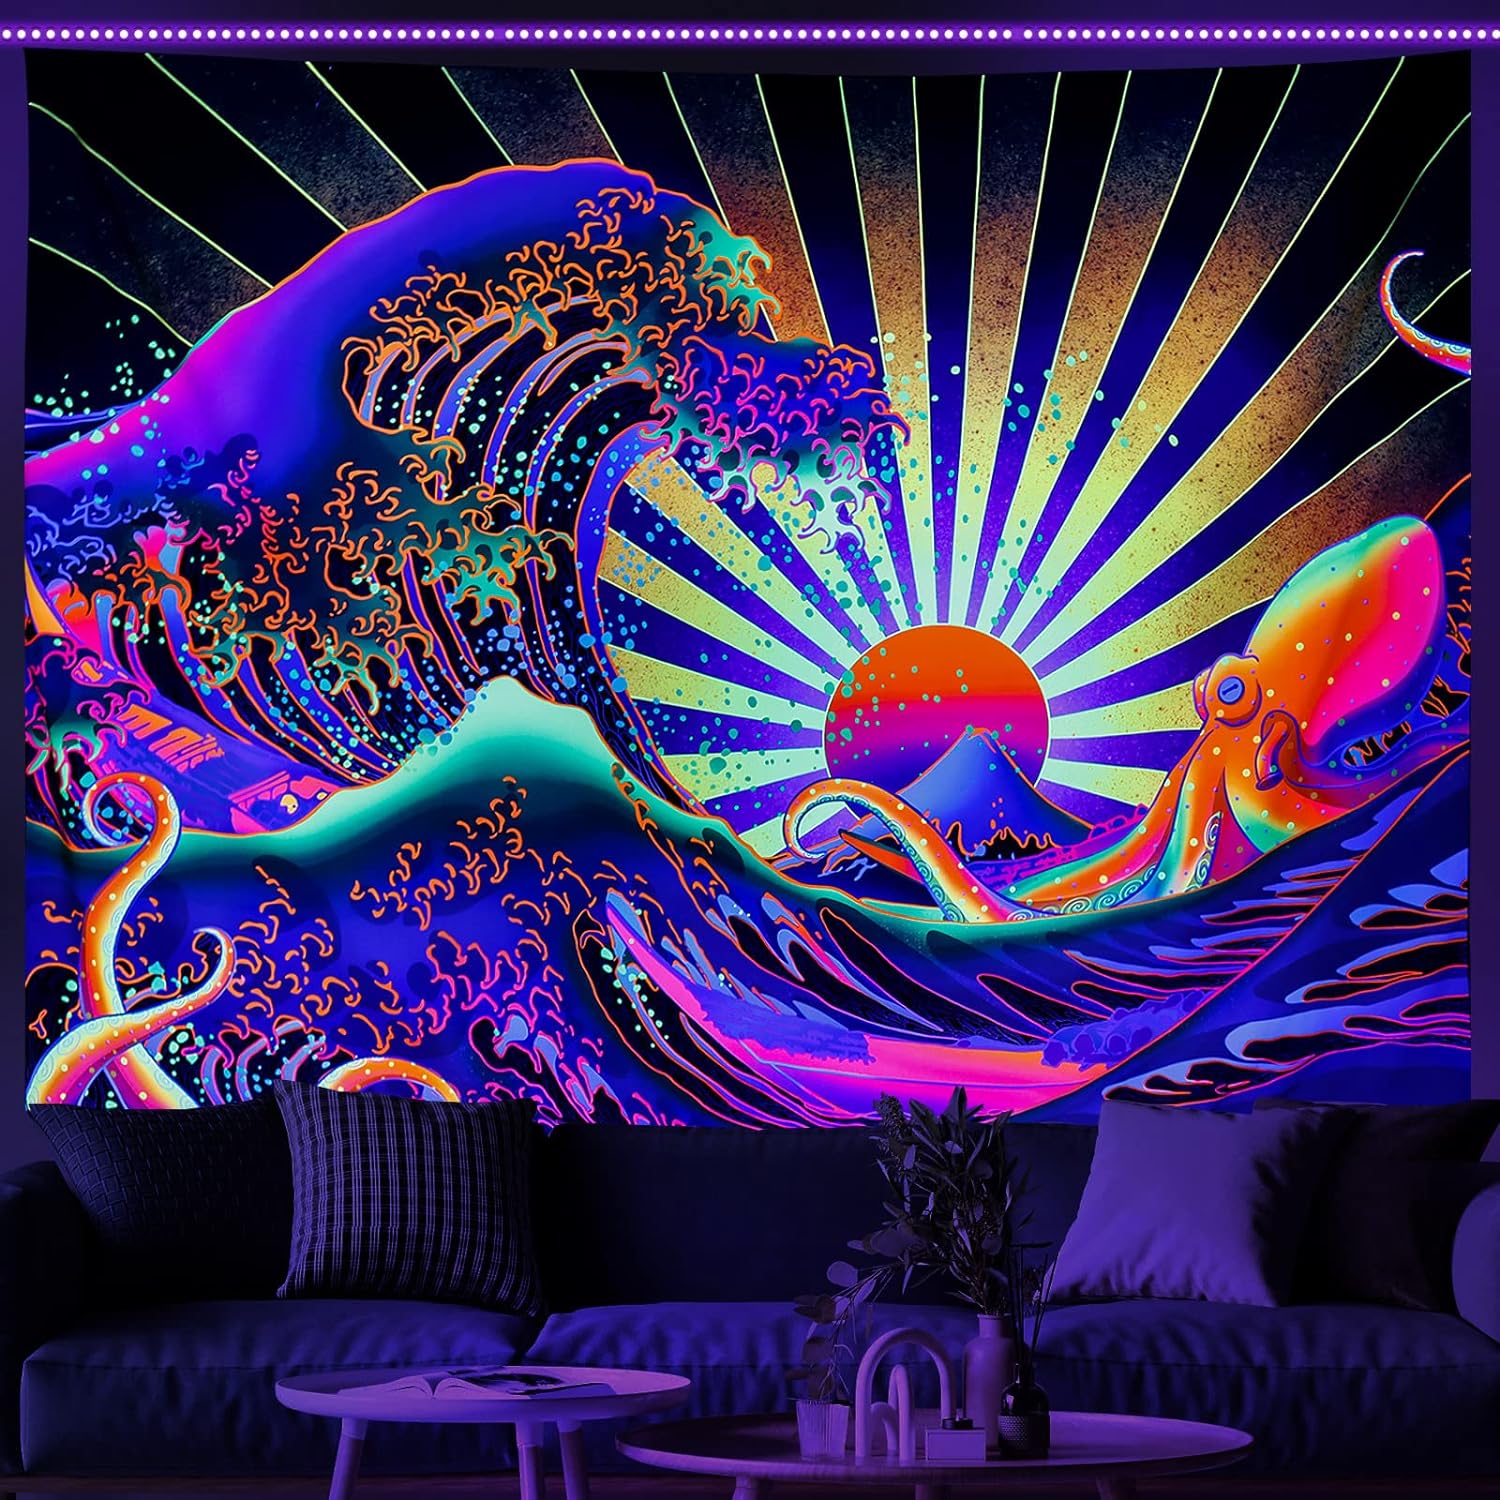 Maccyafst Blacklight Tapestry Great Wave Tapestry UV Reactive Japanese Kanagawa Sunset Tapestry Vintage Ocean Wave Octopus Tapestry Wall Hanging for Bedroom Backdrop